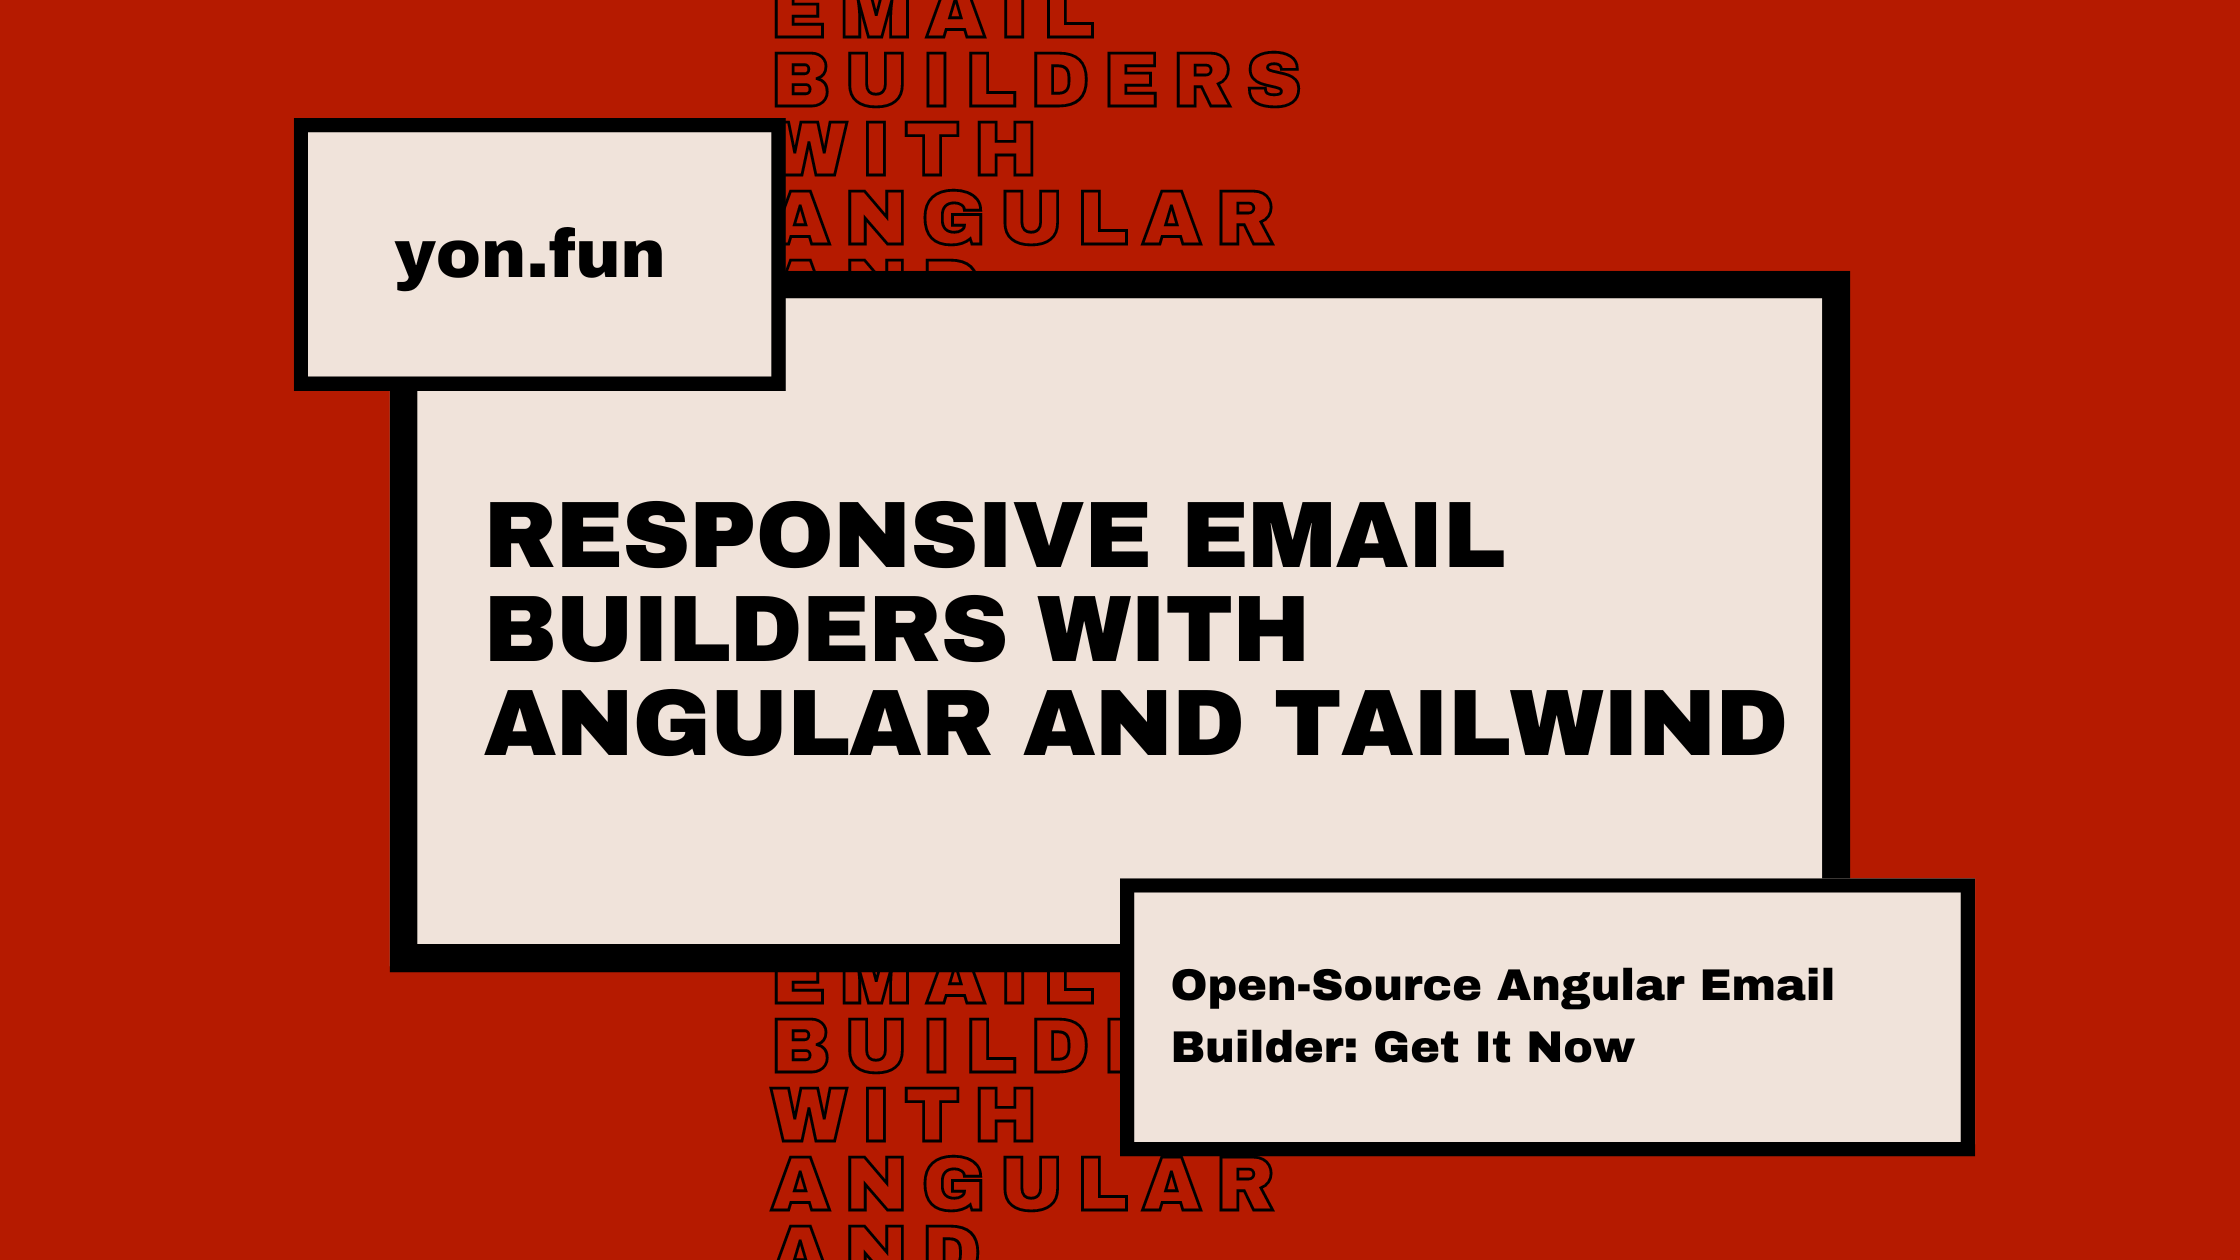 Responsive Email Builders with Angular and Tailwind